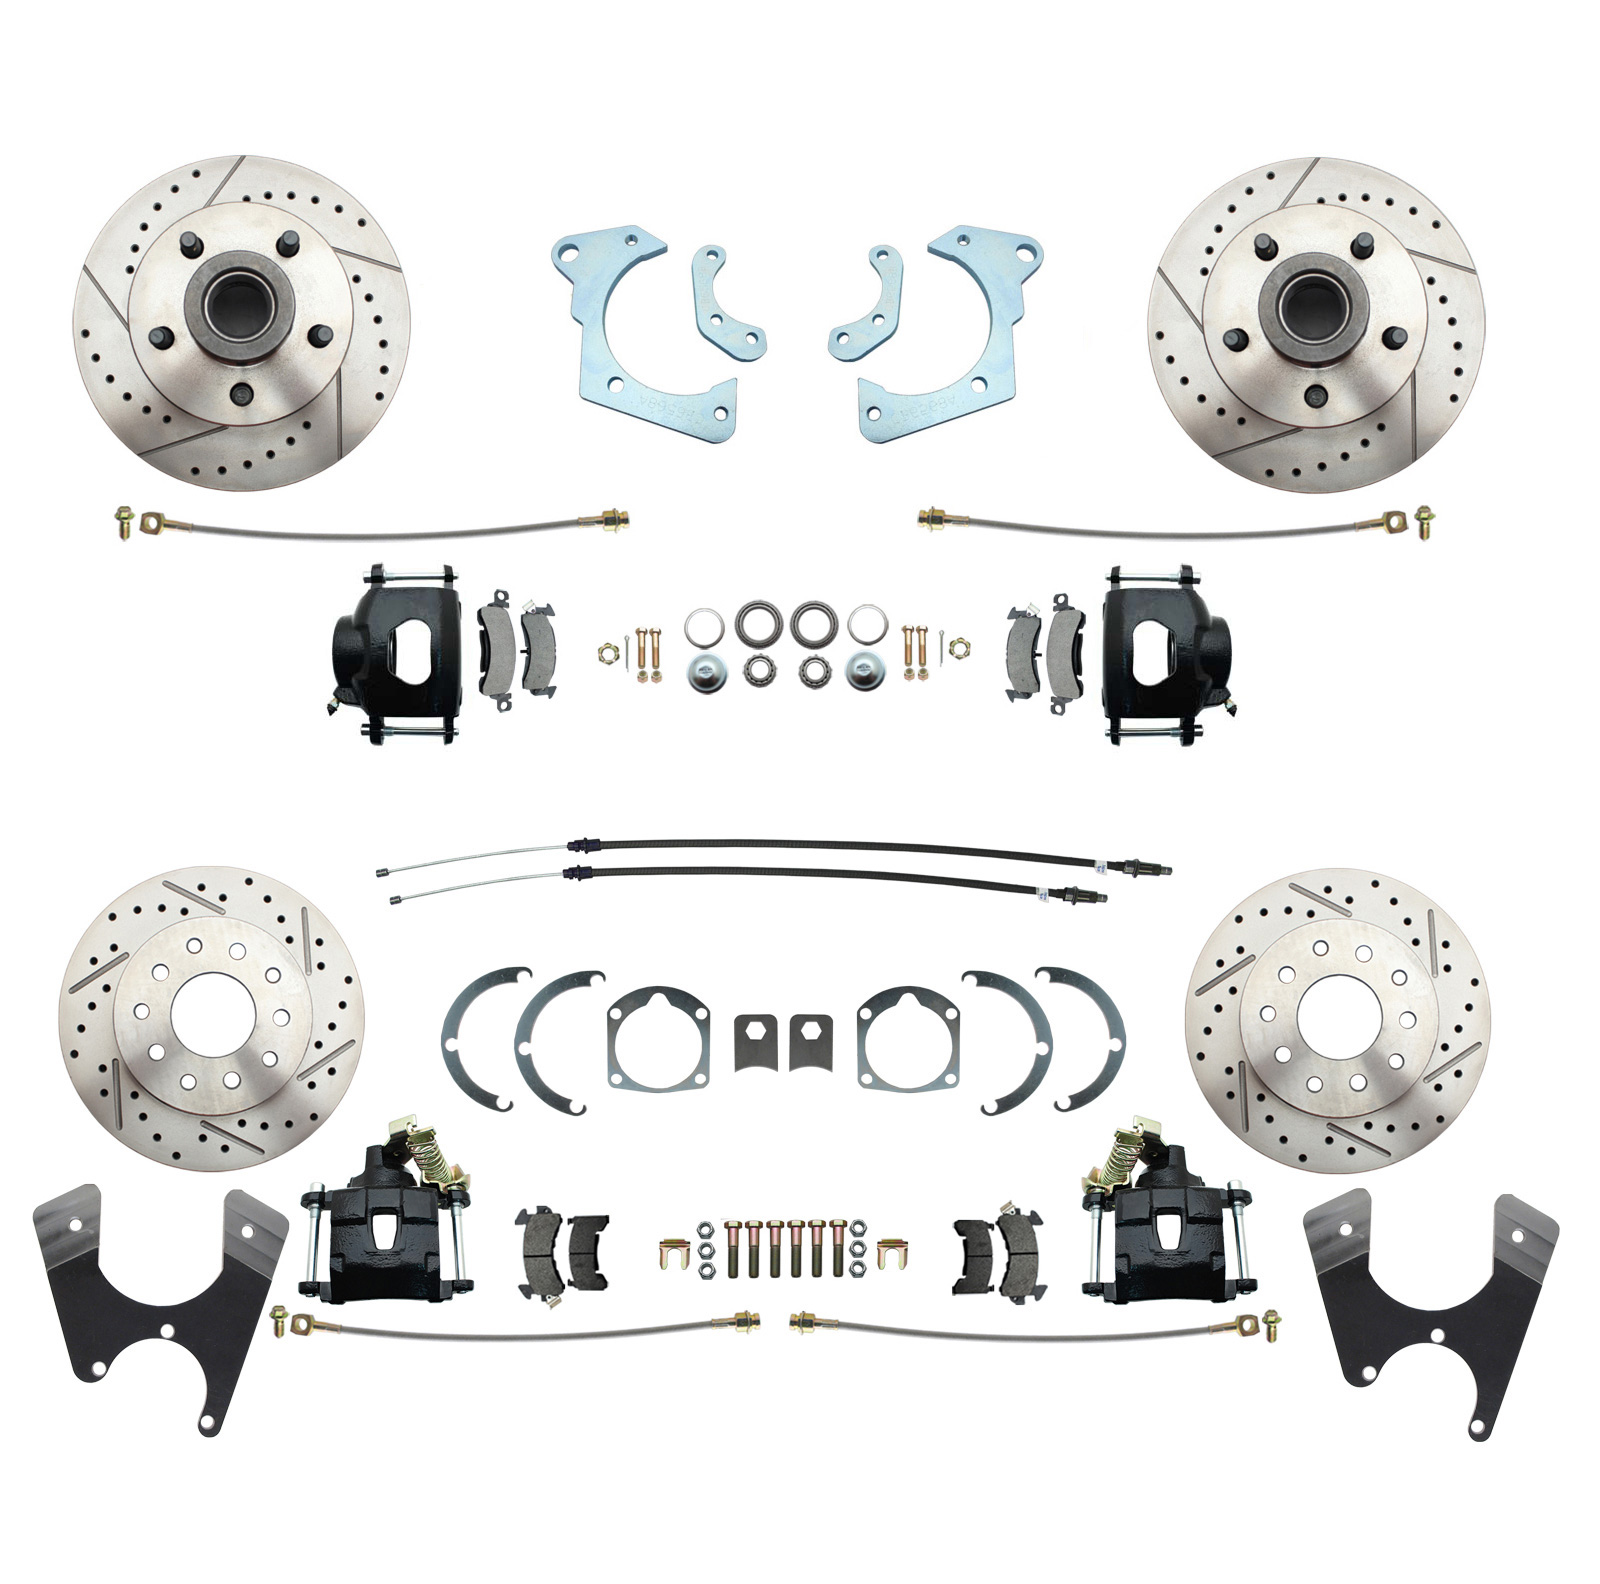 1959-1964 Full Size Chevy Complete Front & Rear Disc Brake Conversion Kit W/ Powder Coated Black Calipers & Drilled/ Slotted Rotors